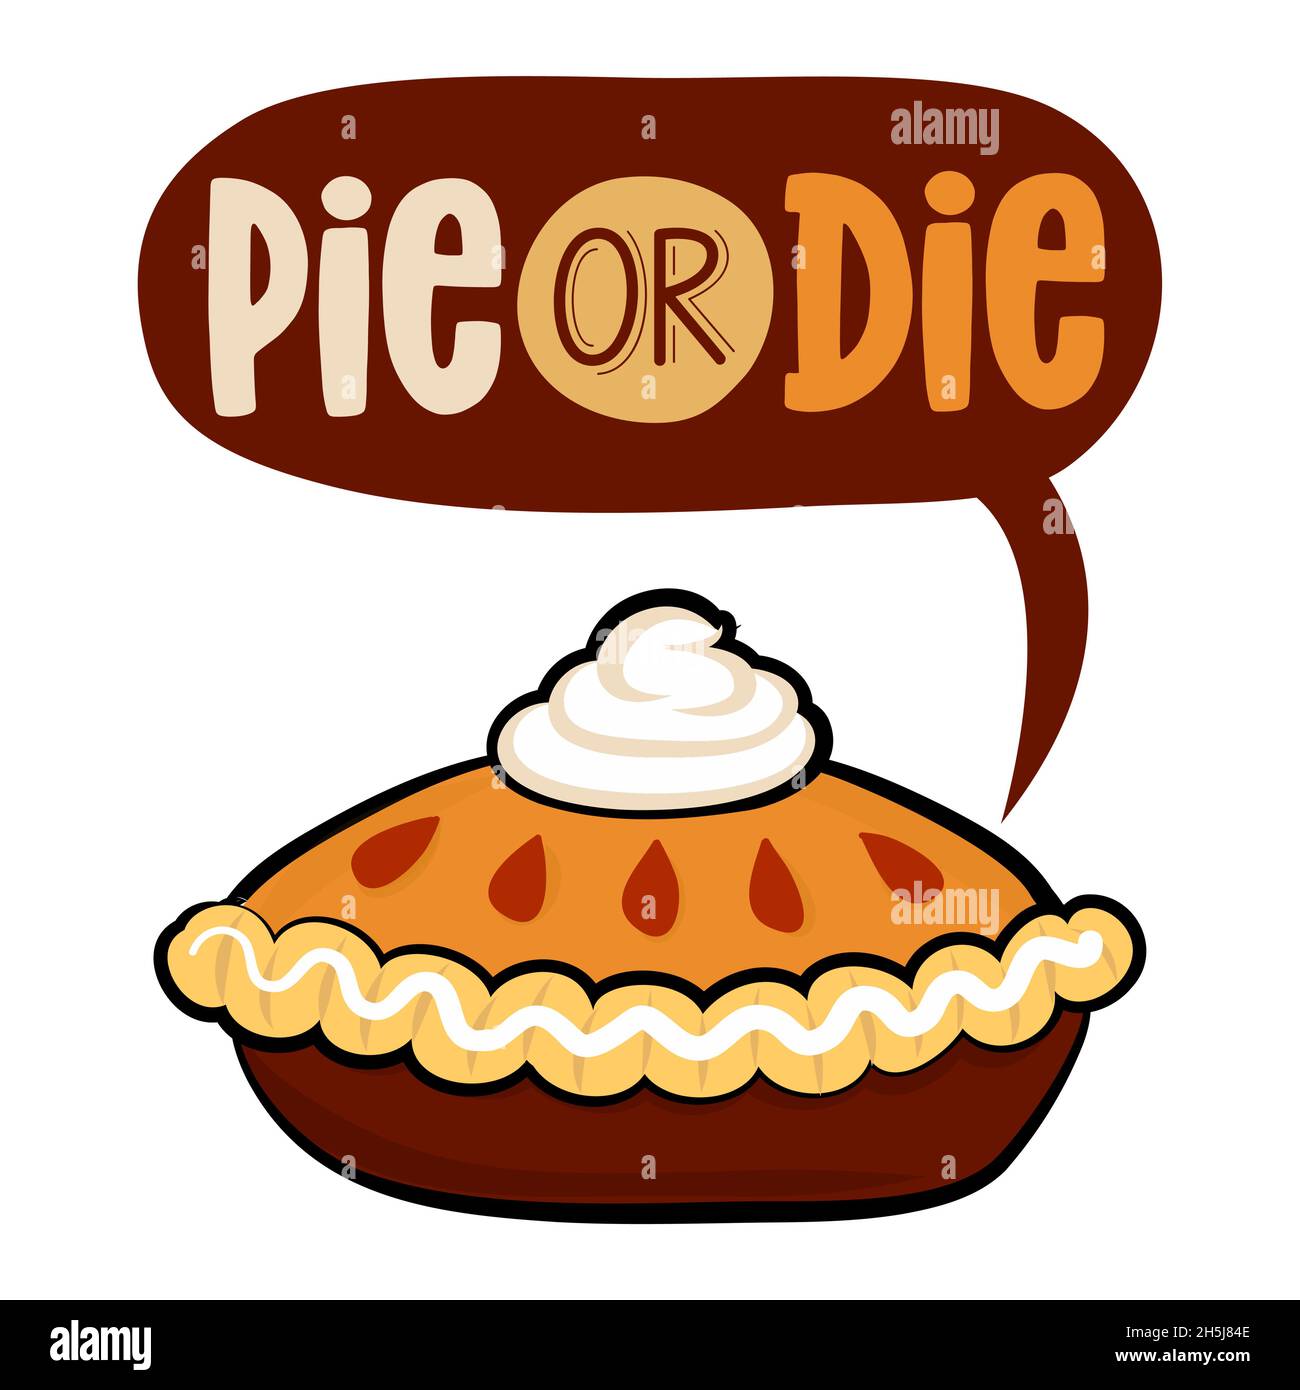 Pie or Die - Hand drawn vector illustration. Autumn color poster. Good for greeting card, banner, textile, gift, t shirt, mug or gift. Thanksgiving Da Stock Vector